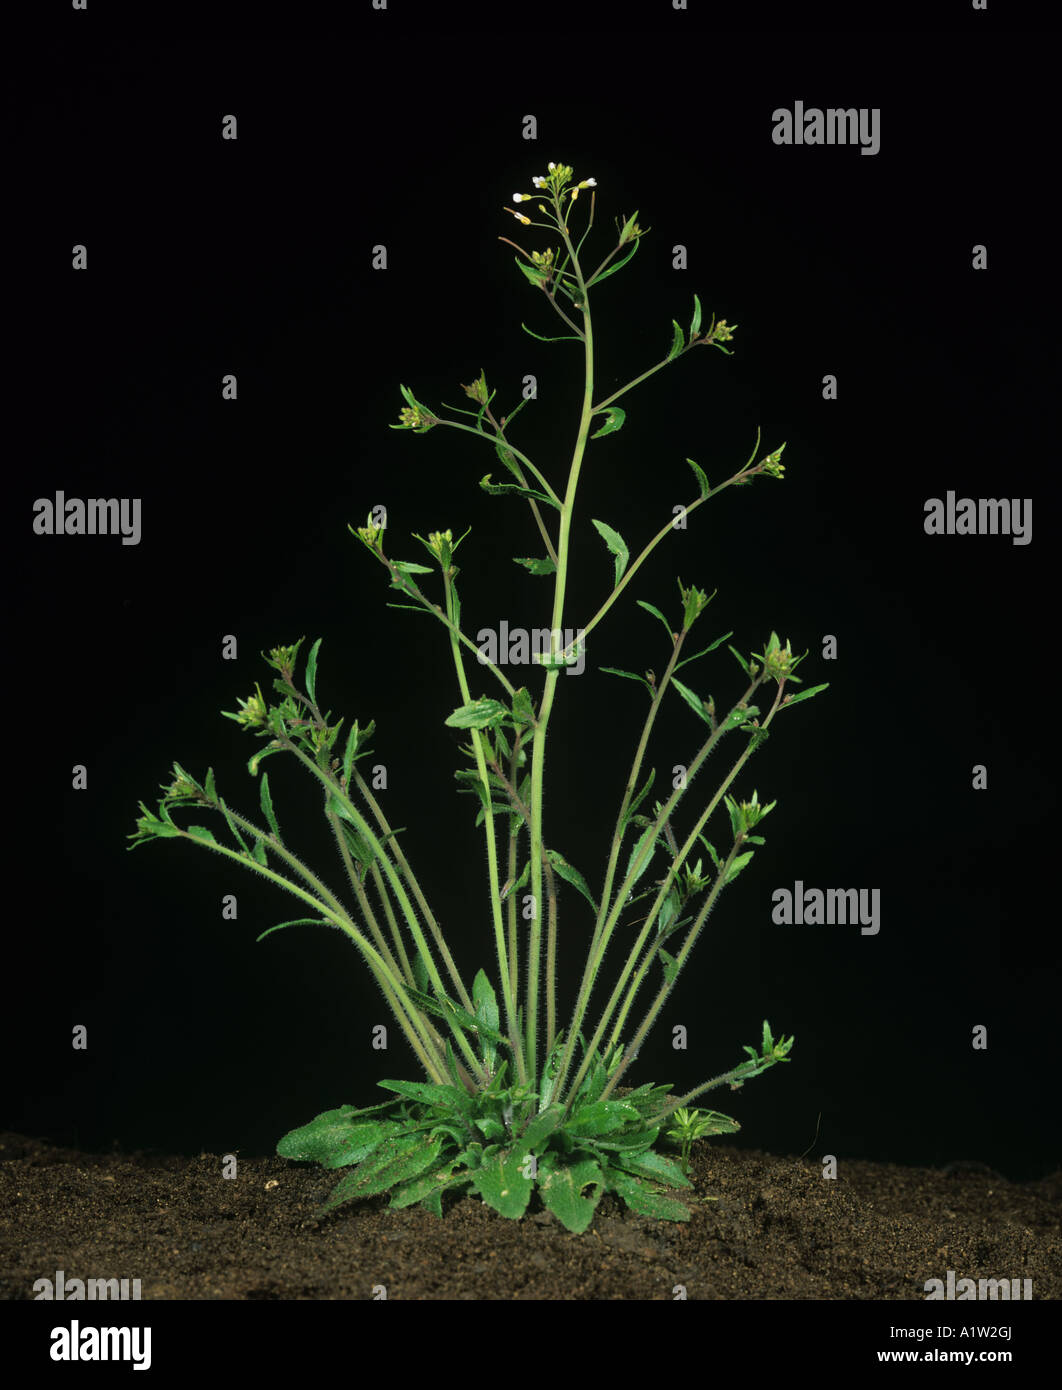 Thale cress or mouse ear cress Arabidopsis thaliana flowering plant used in genetic studies Stock Photo